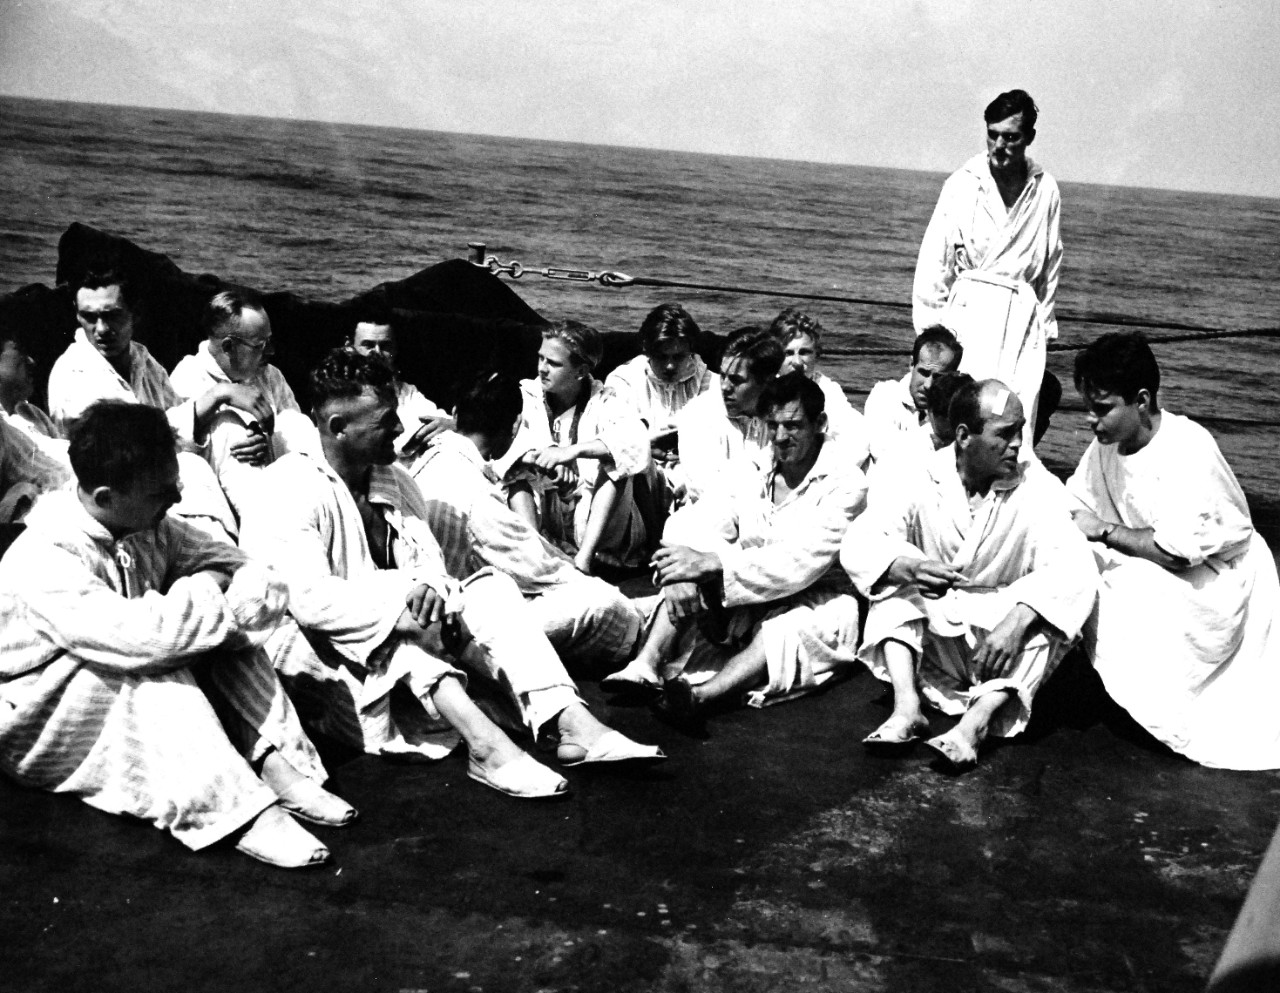 26-G-2587:  Normandy Invasion, German Prisoners, June 1944.  German Prisoners aboard a Coast Guard Manned Transport.  Aboard a Coast Guard-manned transport carrying them to the United States, these wounded and ailing German prisoners follow doctor’s orders and get plenty of fresh air and sunshine.  Attired in robes and slippers provided for them, they lounge on the open deck.  A Coast Guardsman chats at right with a prisoner who speaks English, June 1944.  Official U.S. Coast Guard Photograph, now in the collections of the National Archives.   (2015/5/19).  